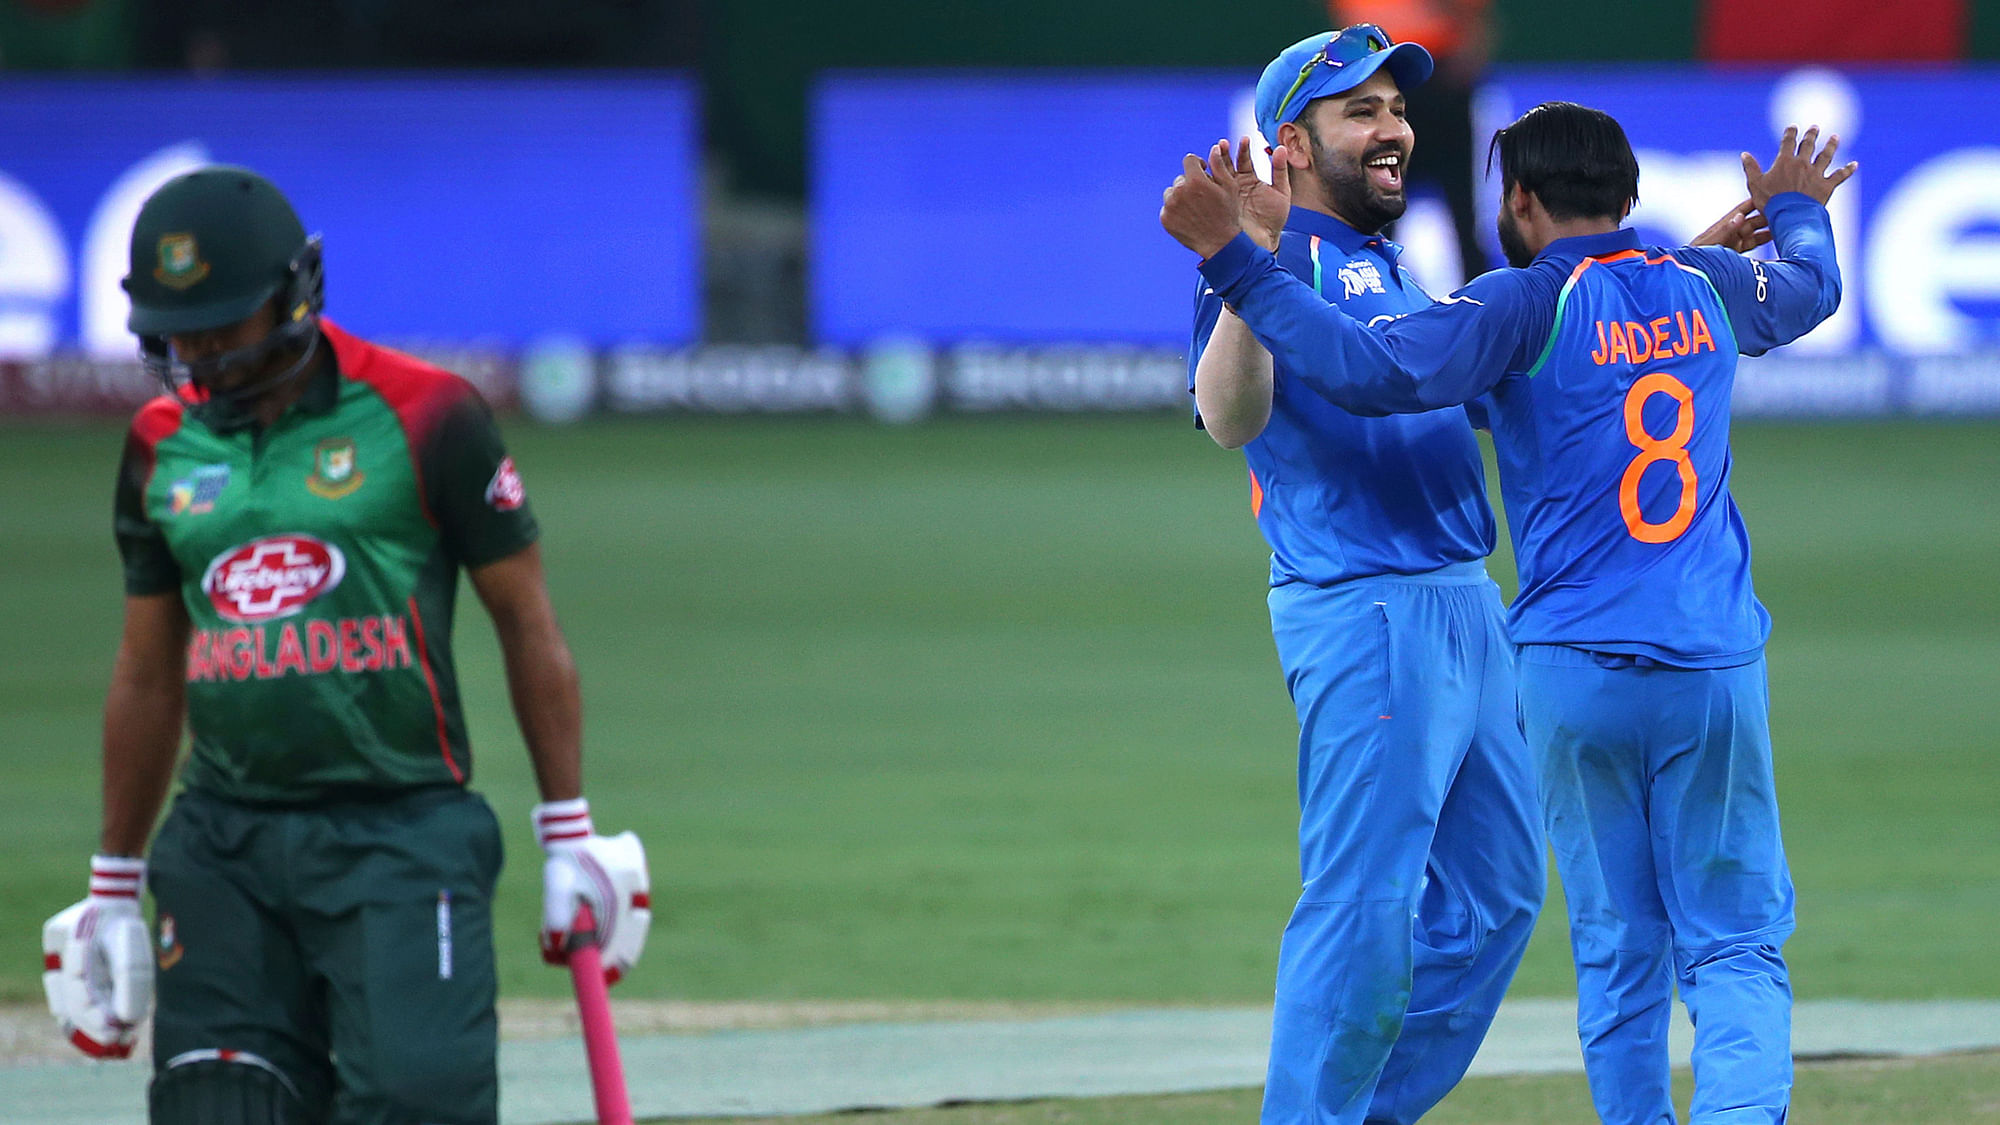 India play Bangladesh in the final of the Asia Cup on Friday, 28 September.